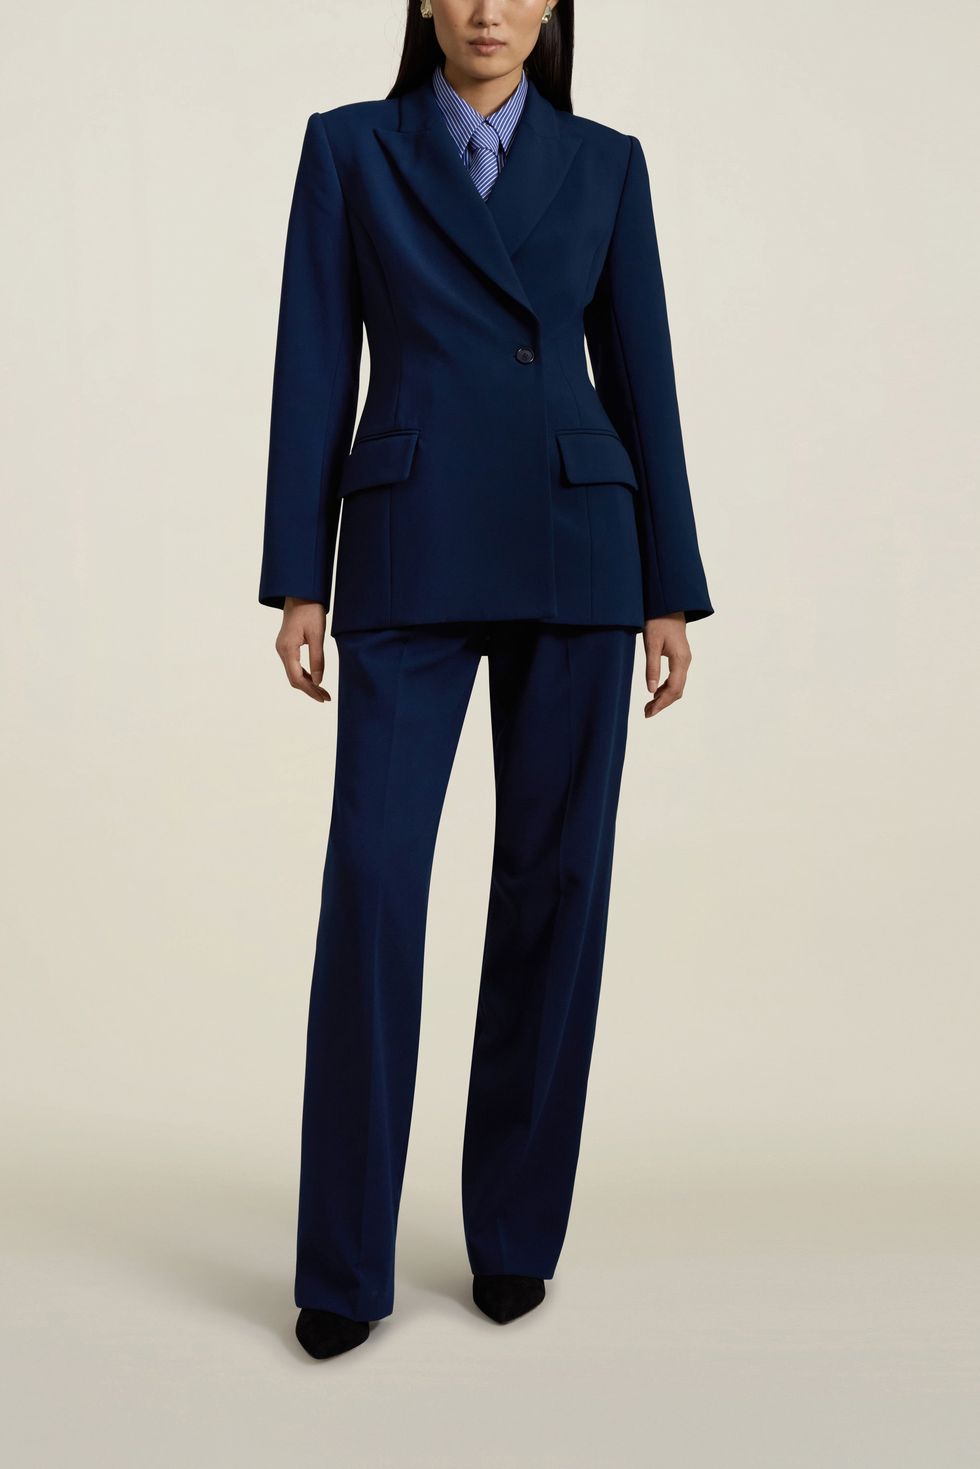 Navy Blue Formal Pant Suit Set In For Women Perfect For Work